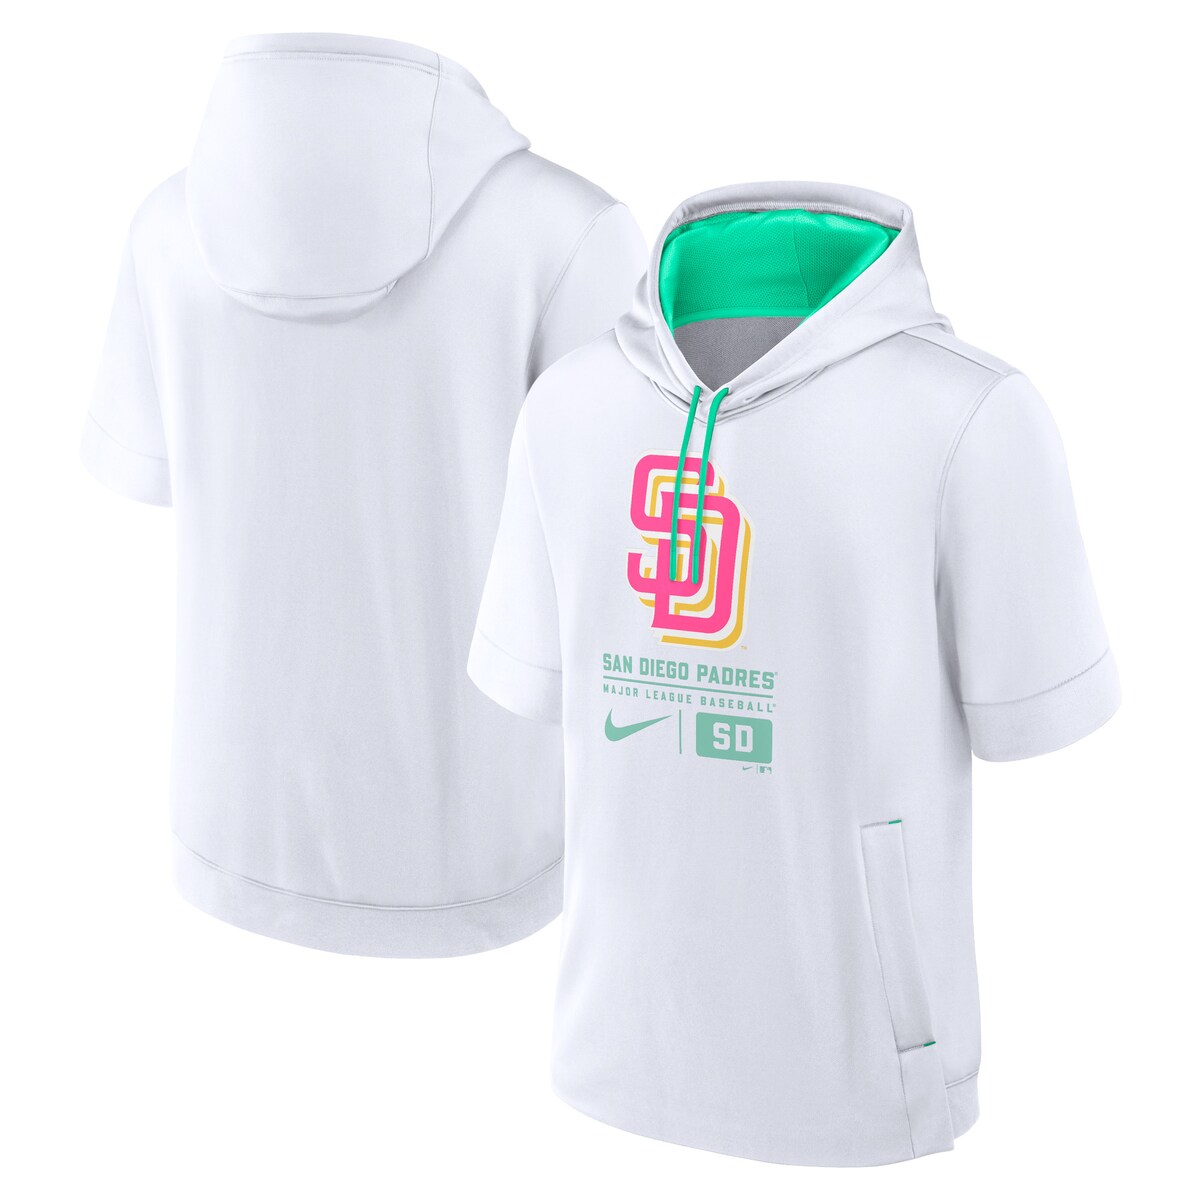 MLB phX  vI[o[ p[J[ Nike iCL Y zCg (Men's Nike City Connect Colorblocked Short Sleeve Hoodie CC24)